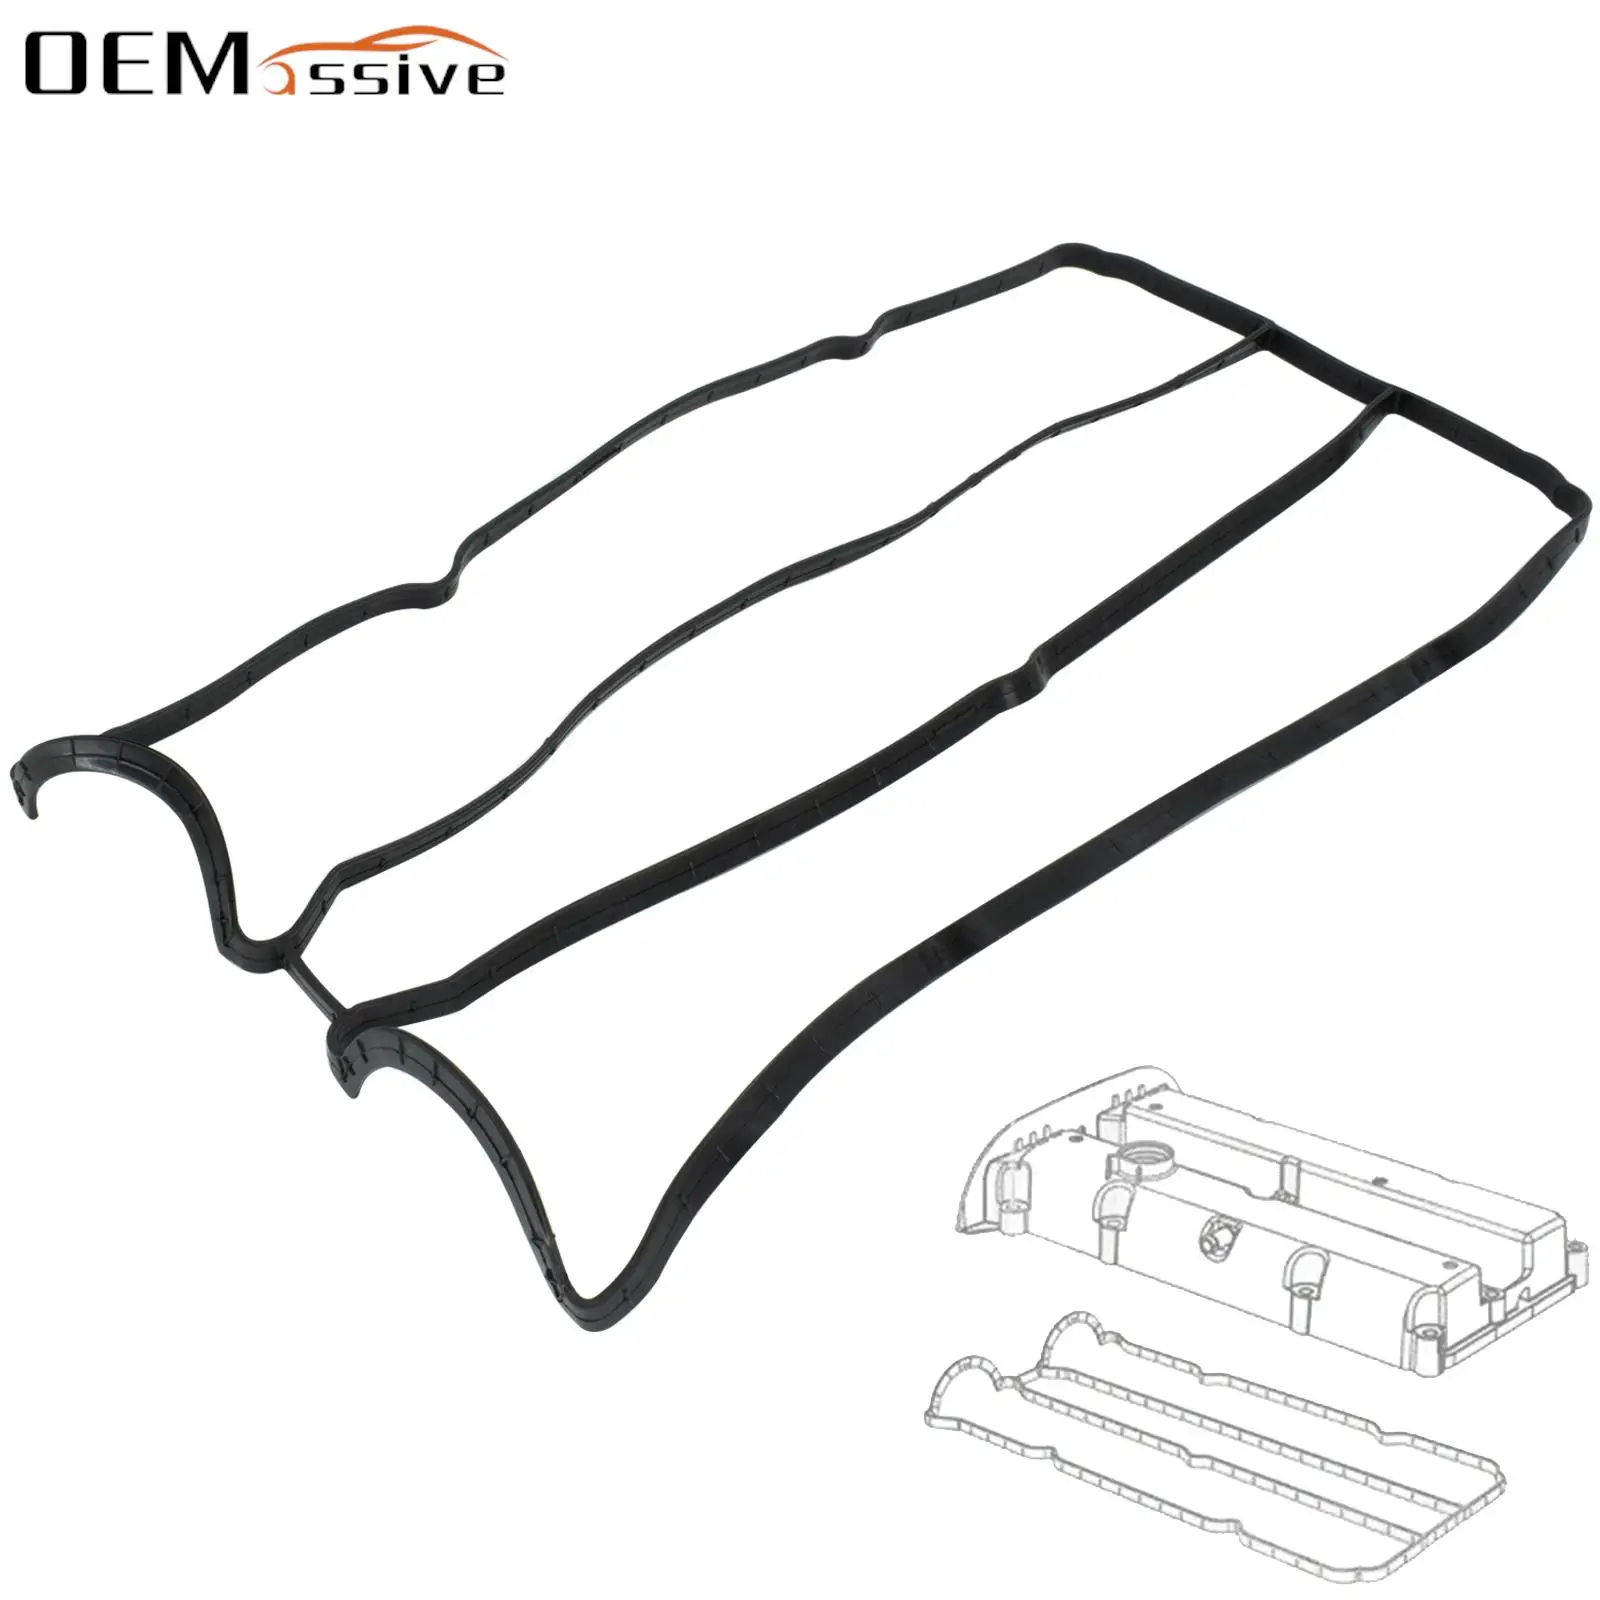 

Car Engine Rocker Cover Gasket Seal For Ford C-Max Fusion Fiesta Focus 1141575 1S6G6K260AA C20110235 30711654 11096200 EP1300904